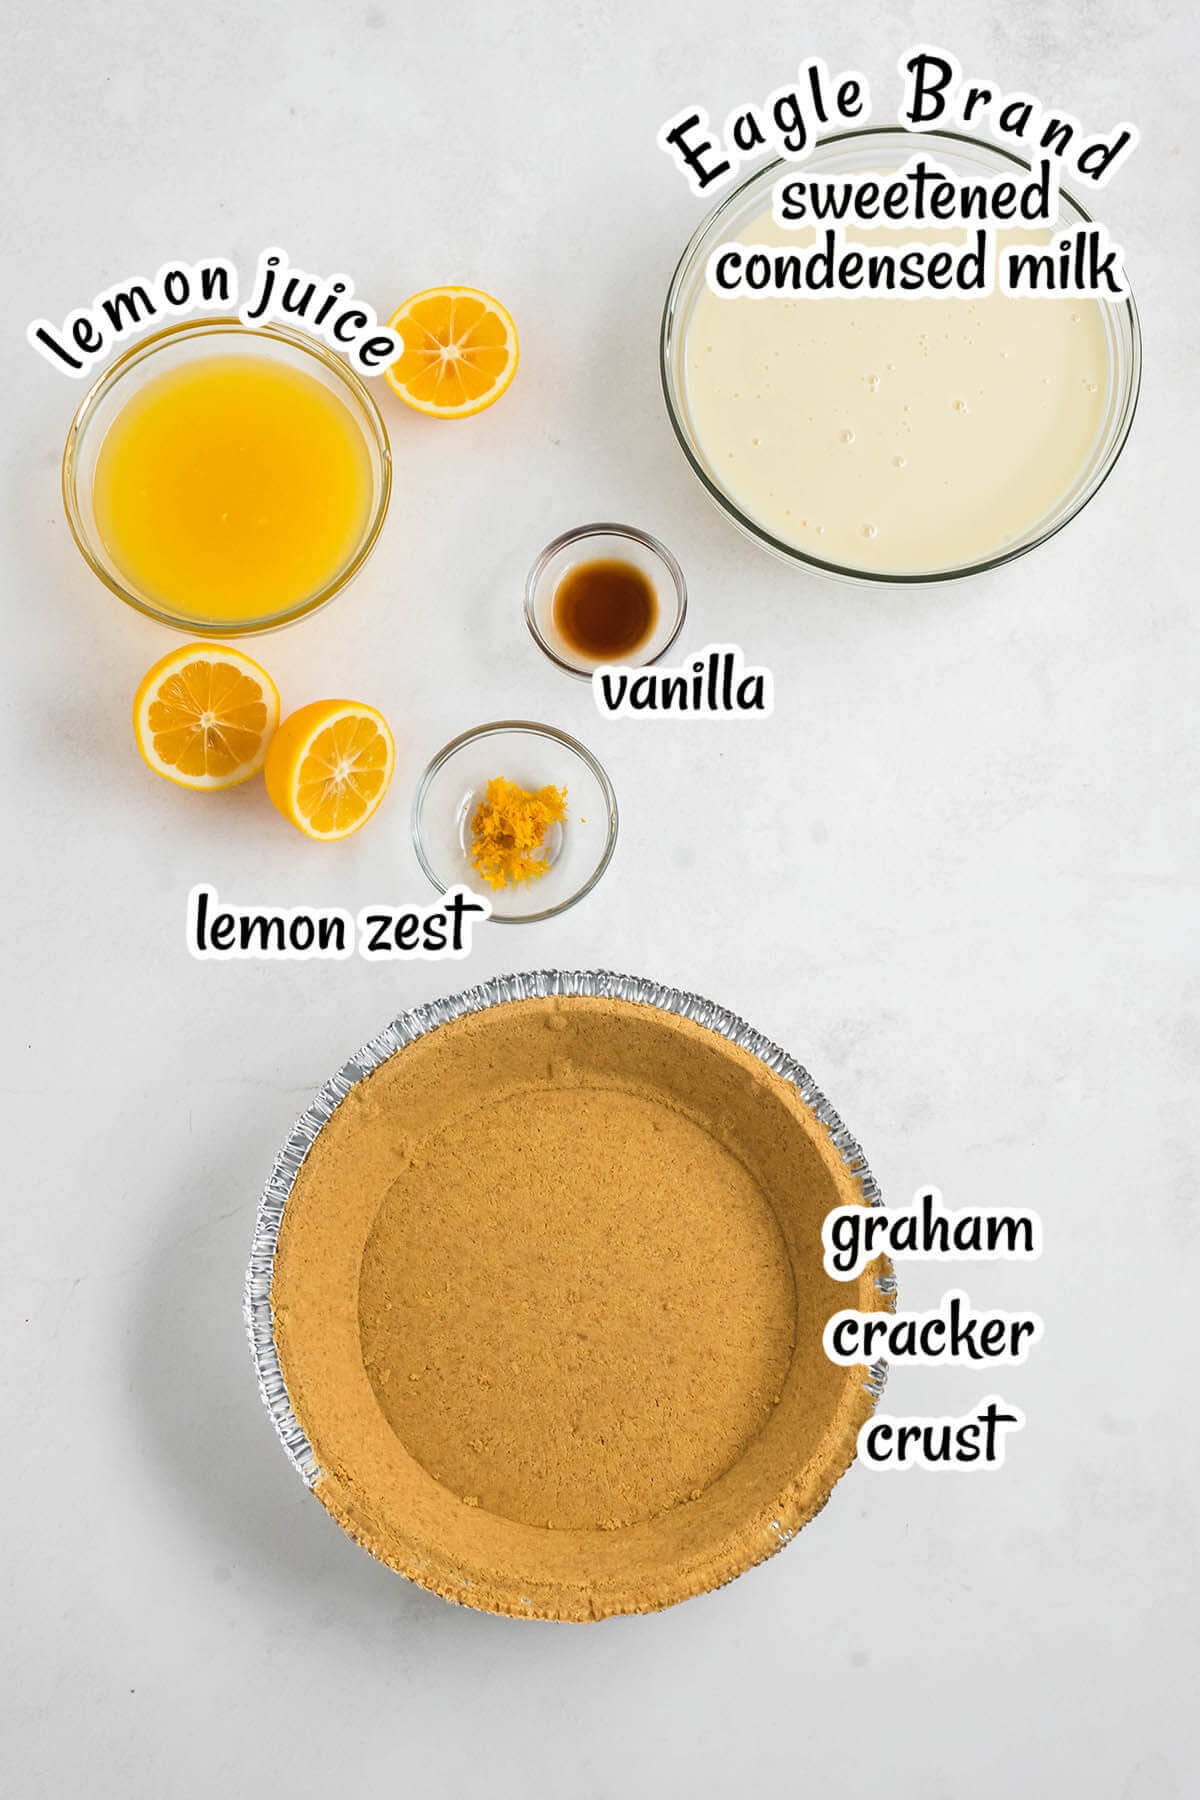 Ingredients showing how to make no bake pie recipe, with print overlay.